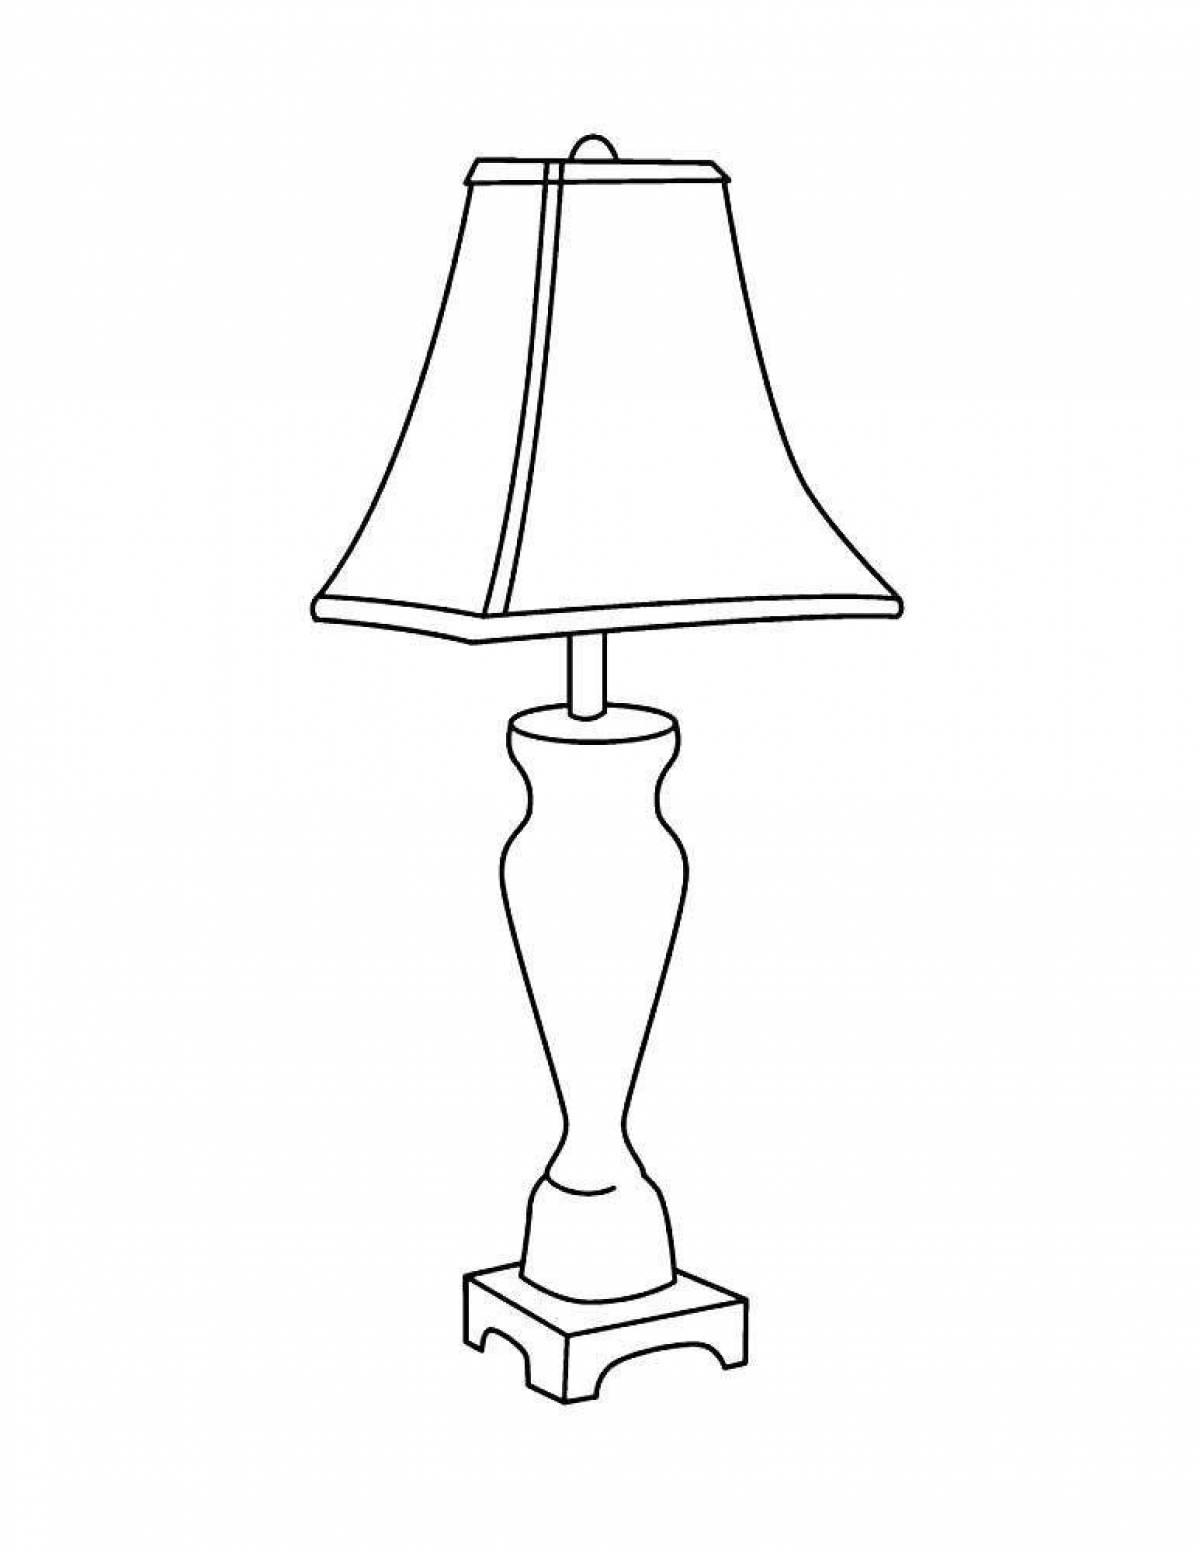 Colourful lamp coloring page